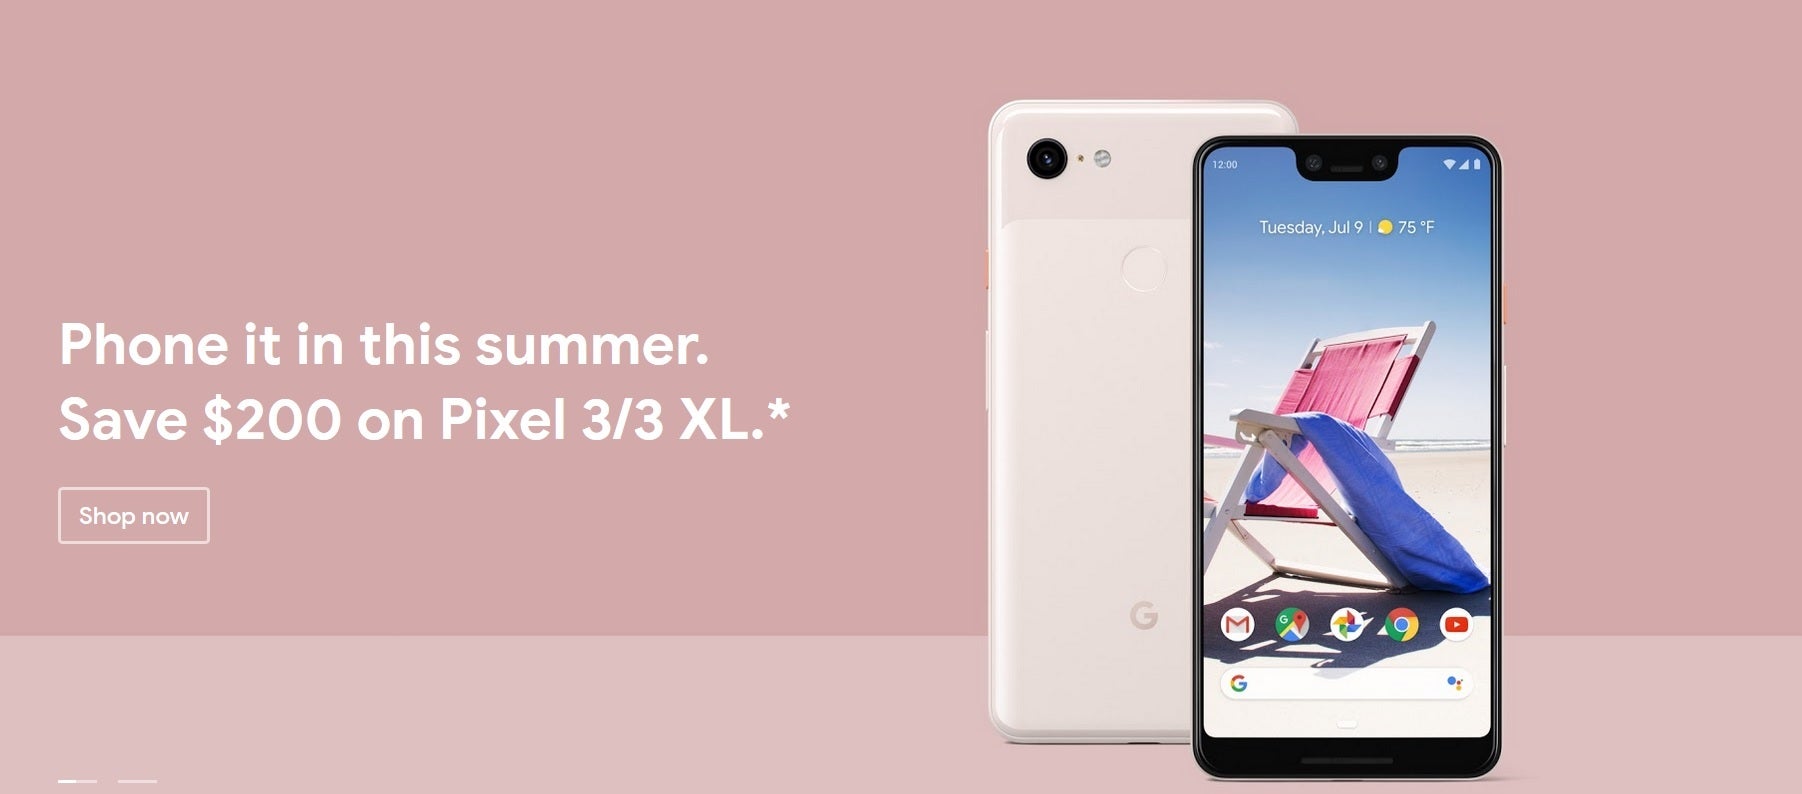 Save $200 on the Pixel 3 and Pixel 3 XL at the Google Store - Google once again takes $200 off the Pixel 3 and Pixel 3 XL